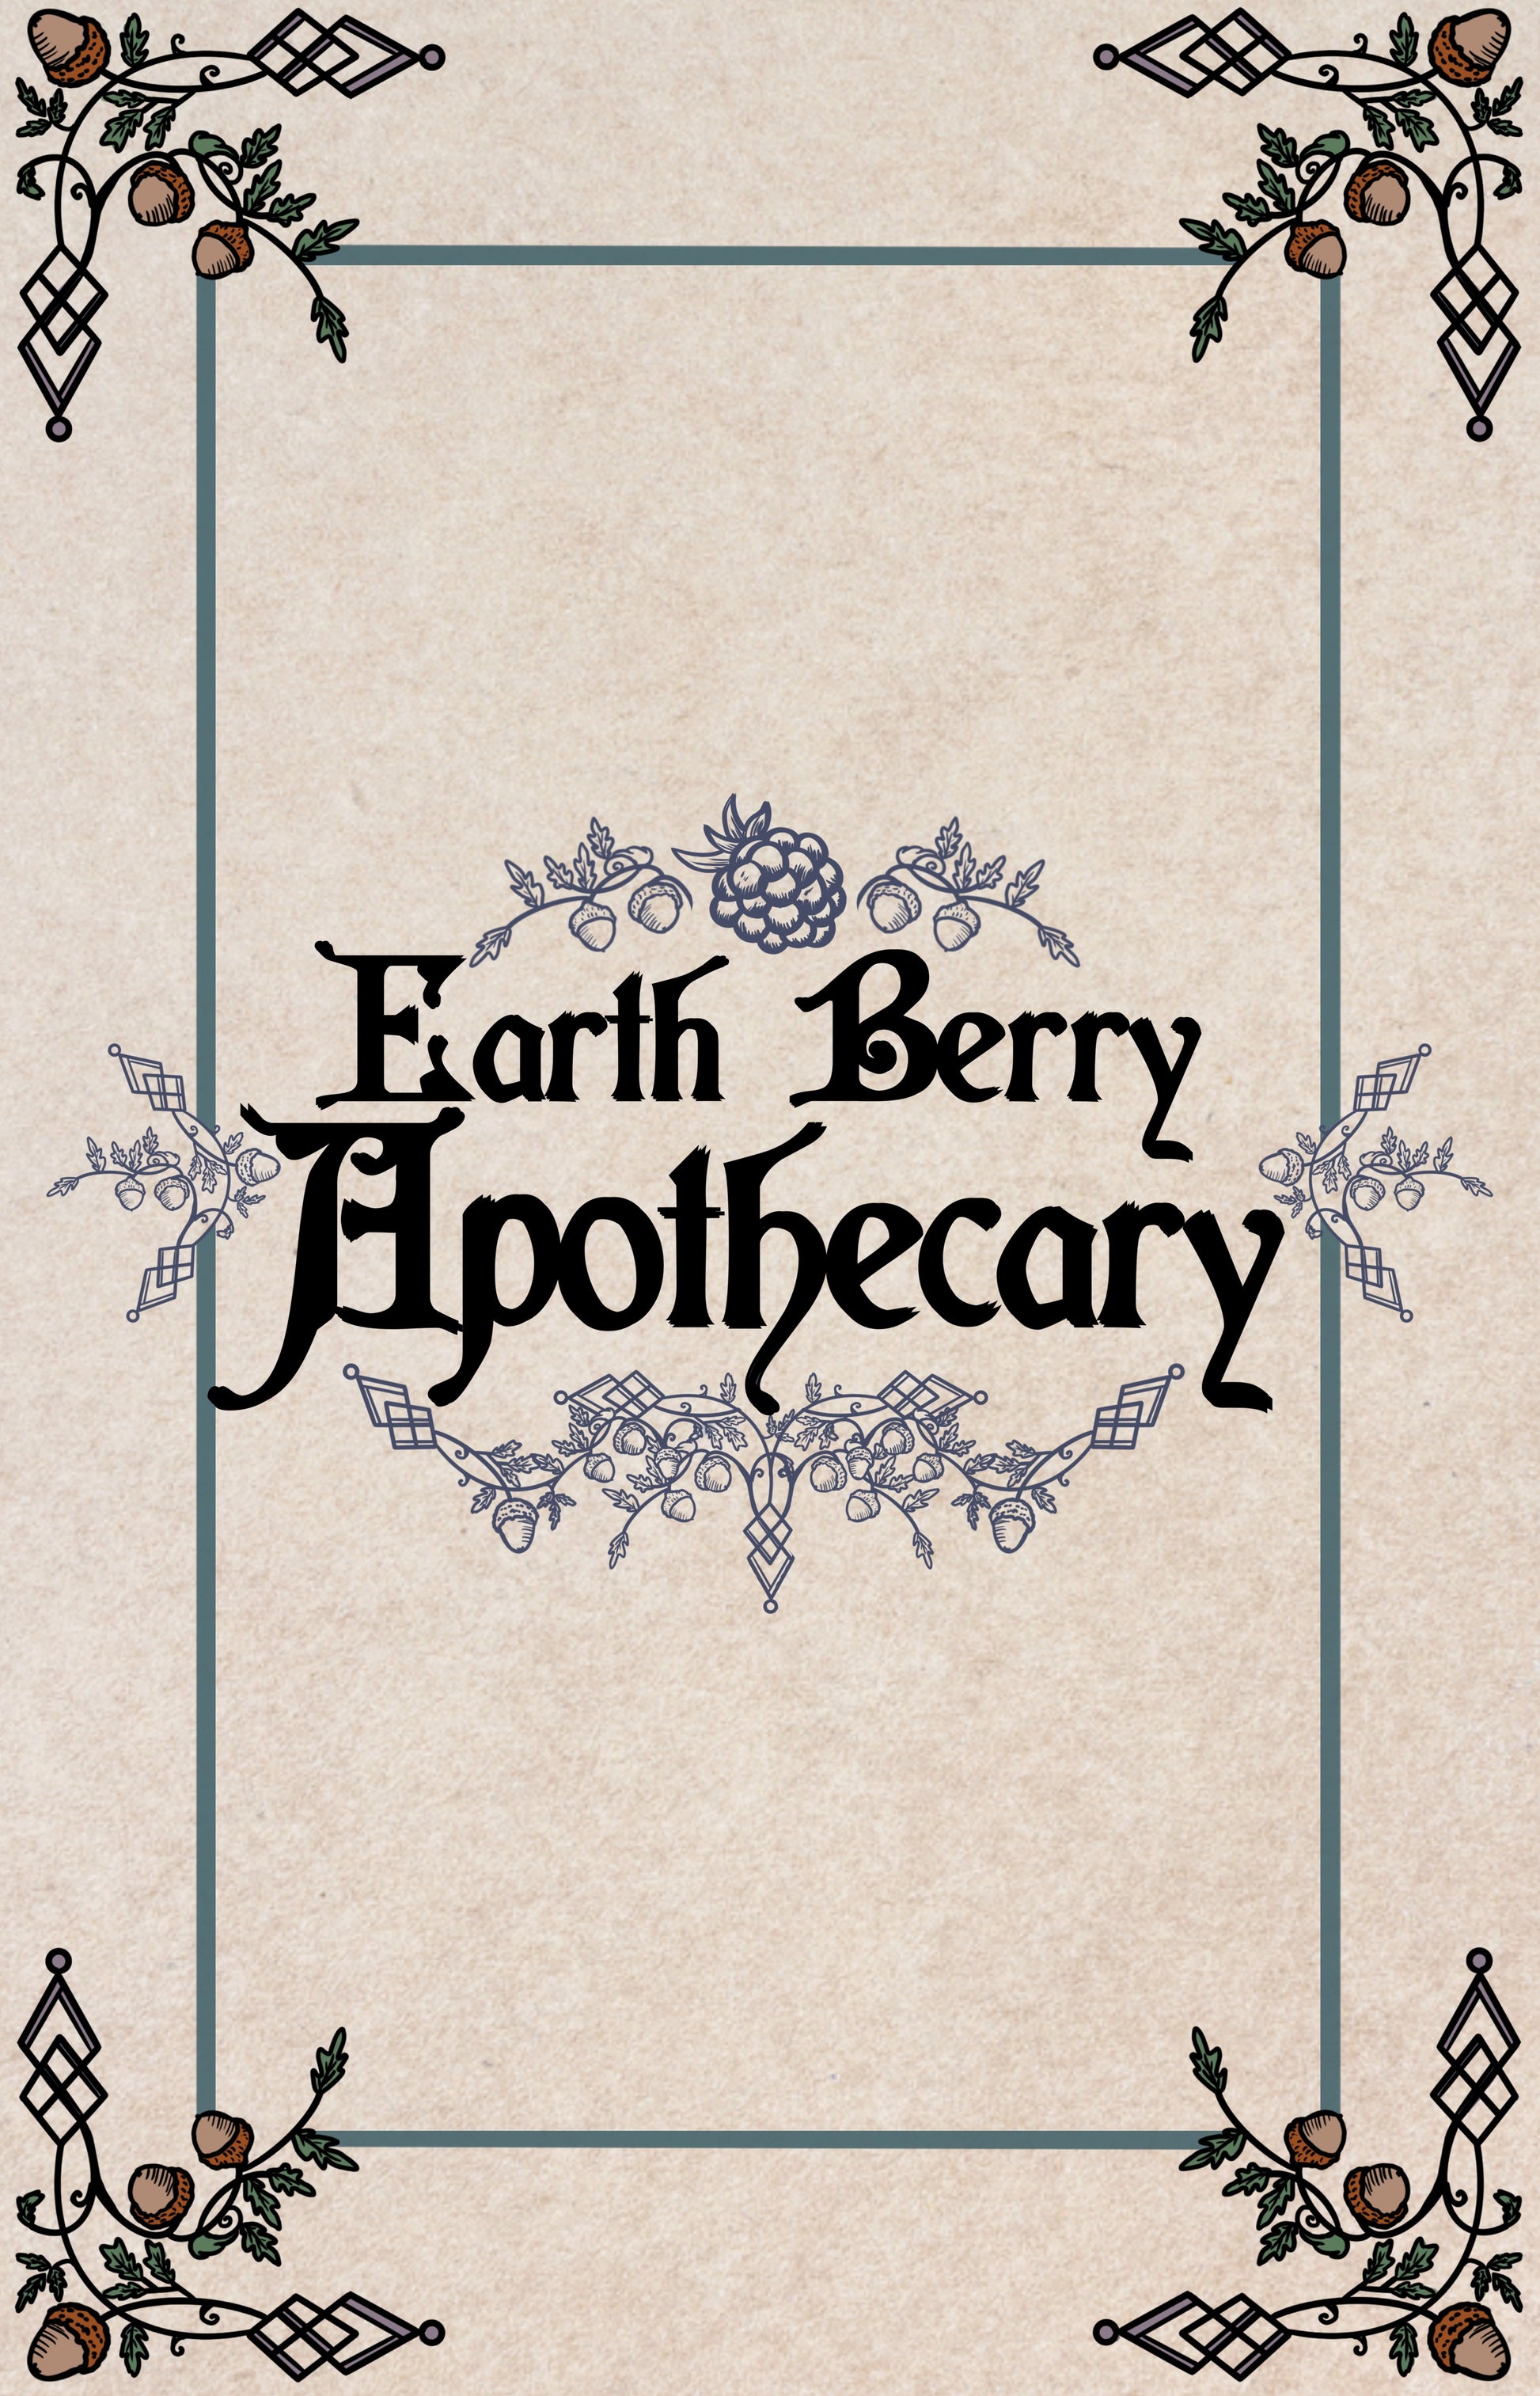 Earth berry apothecary fantasy themed playing cards. Inspired by nature.